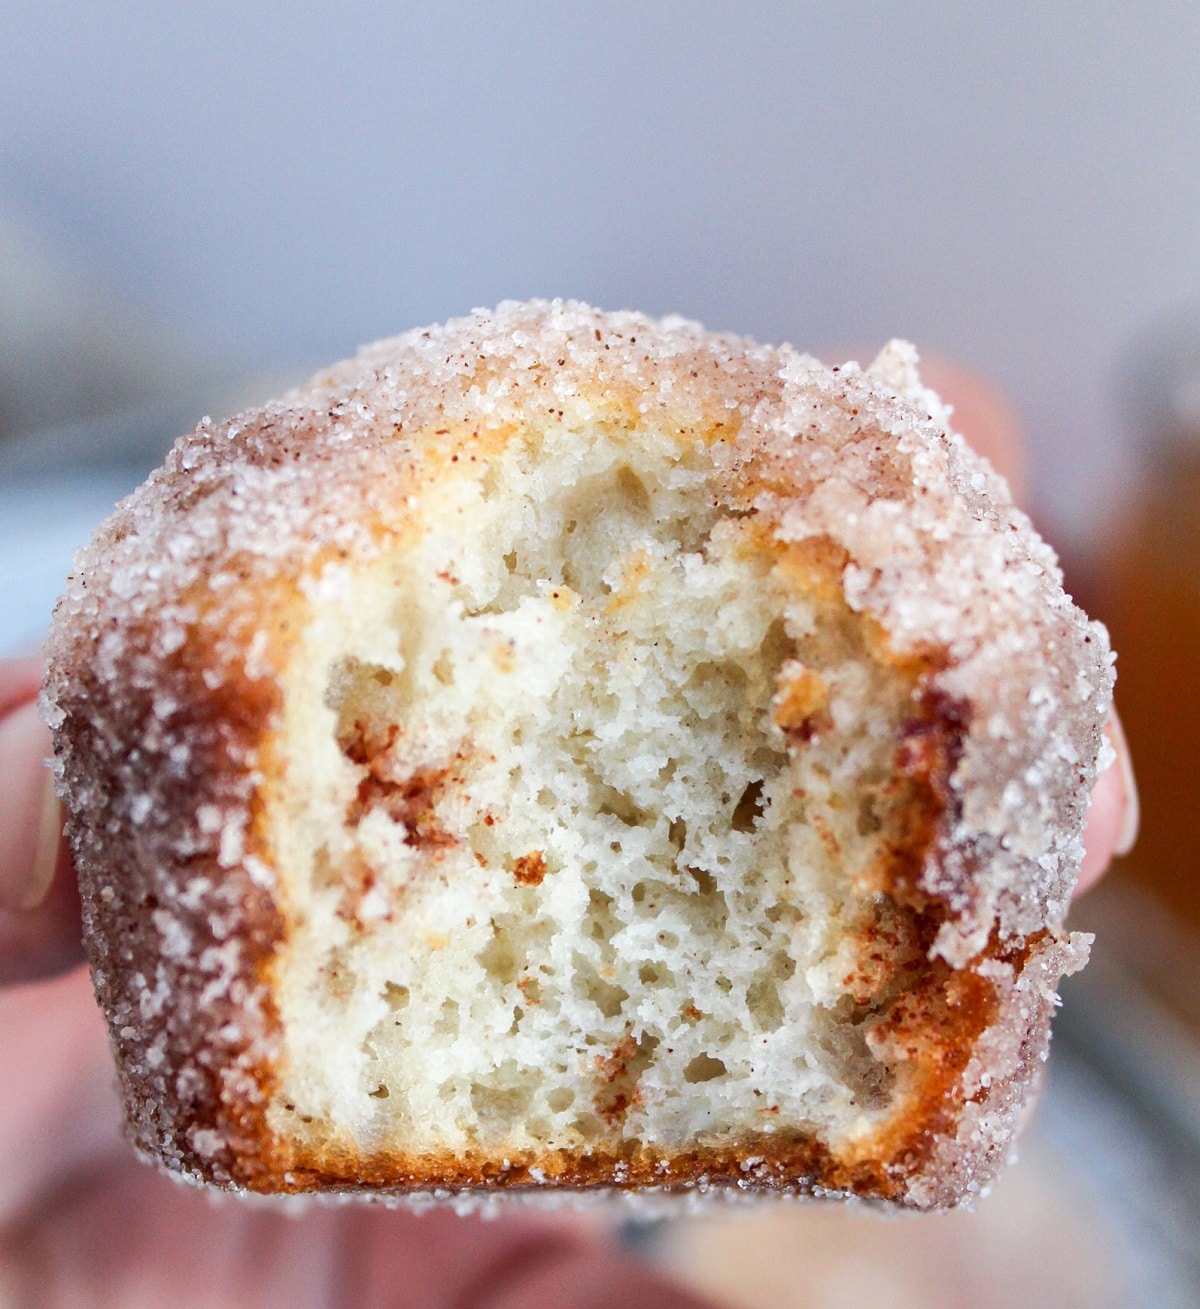 apple cider donut muffin held in hand with a bite taken